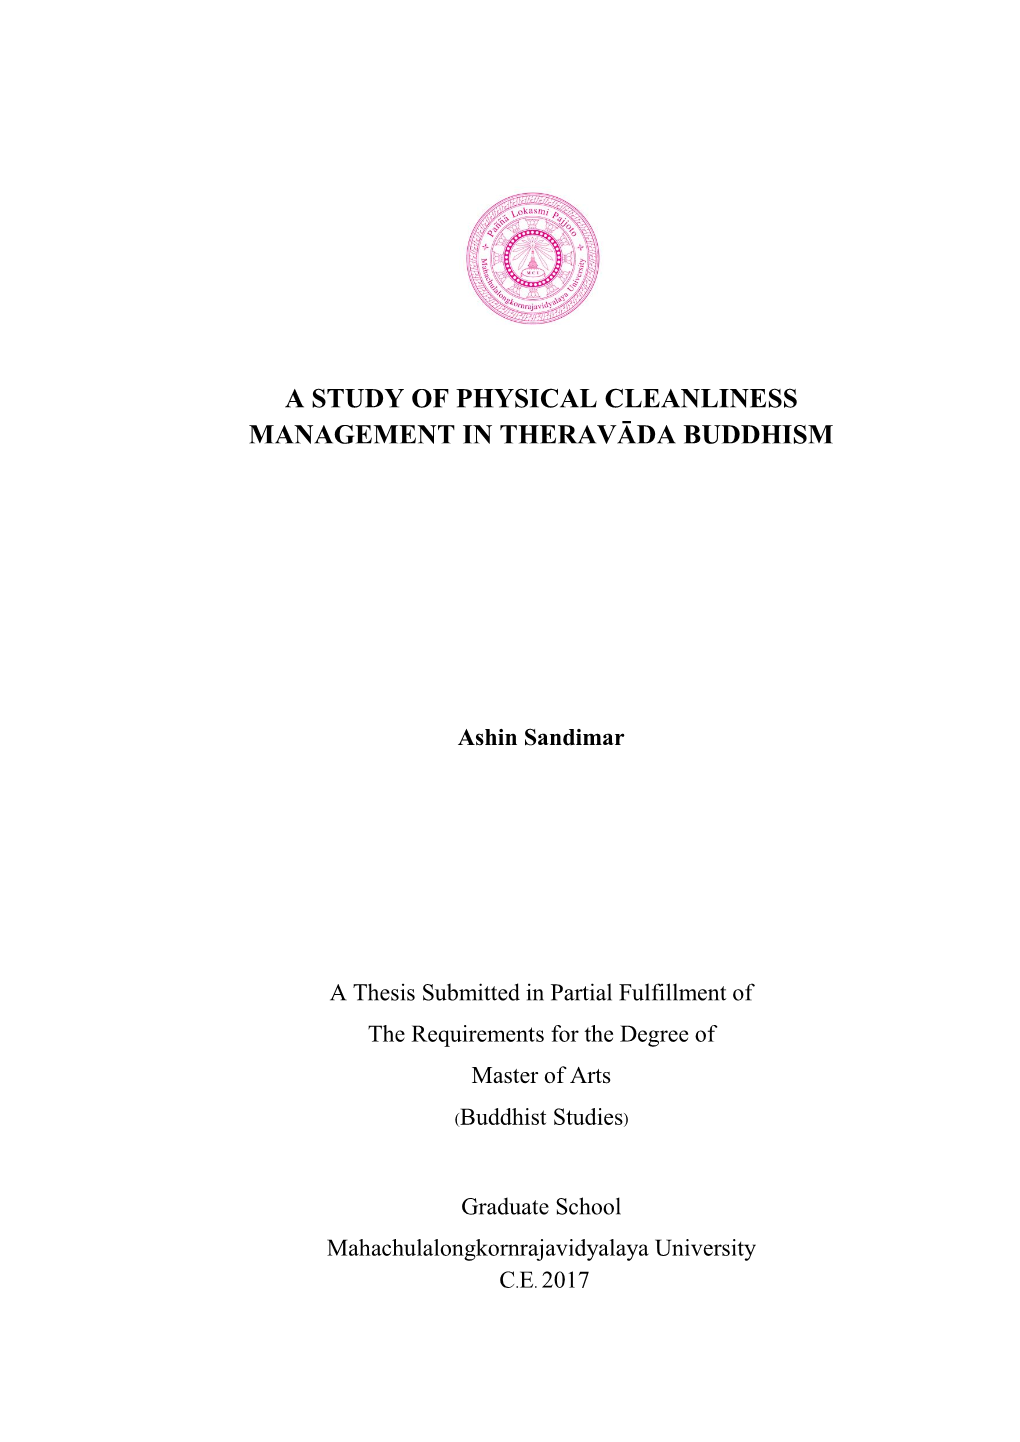 A Study of Physical Cleanliness Management in Theravāda Buddhism